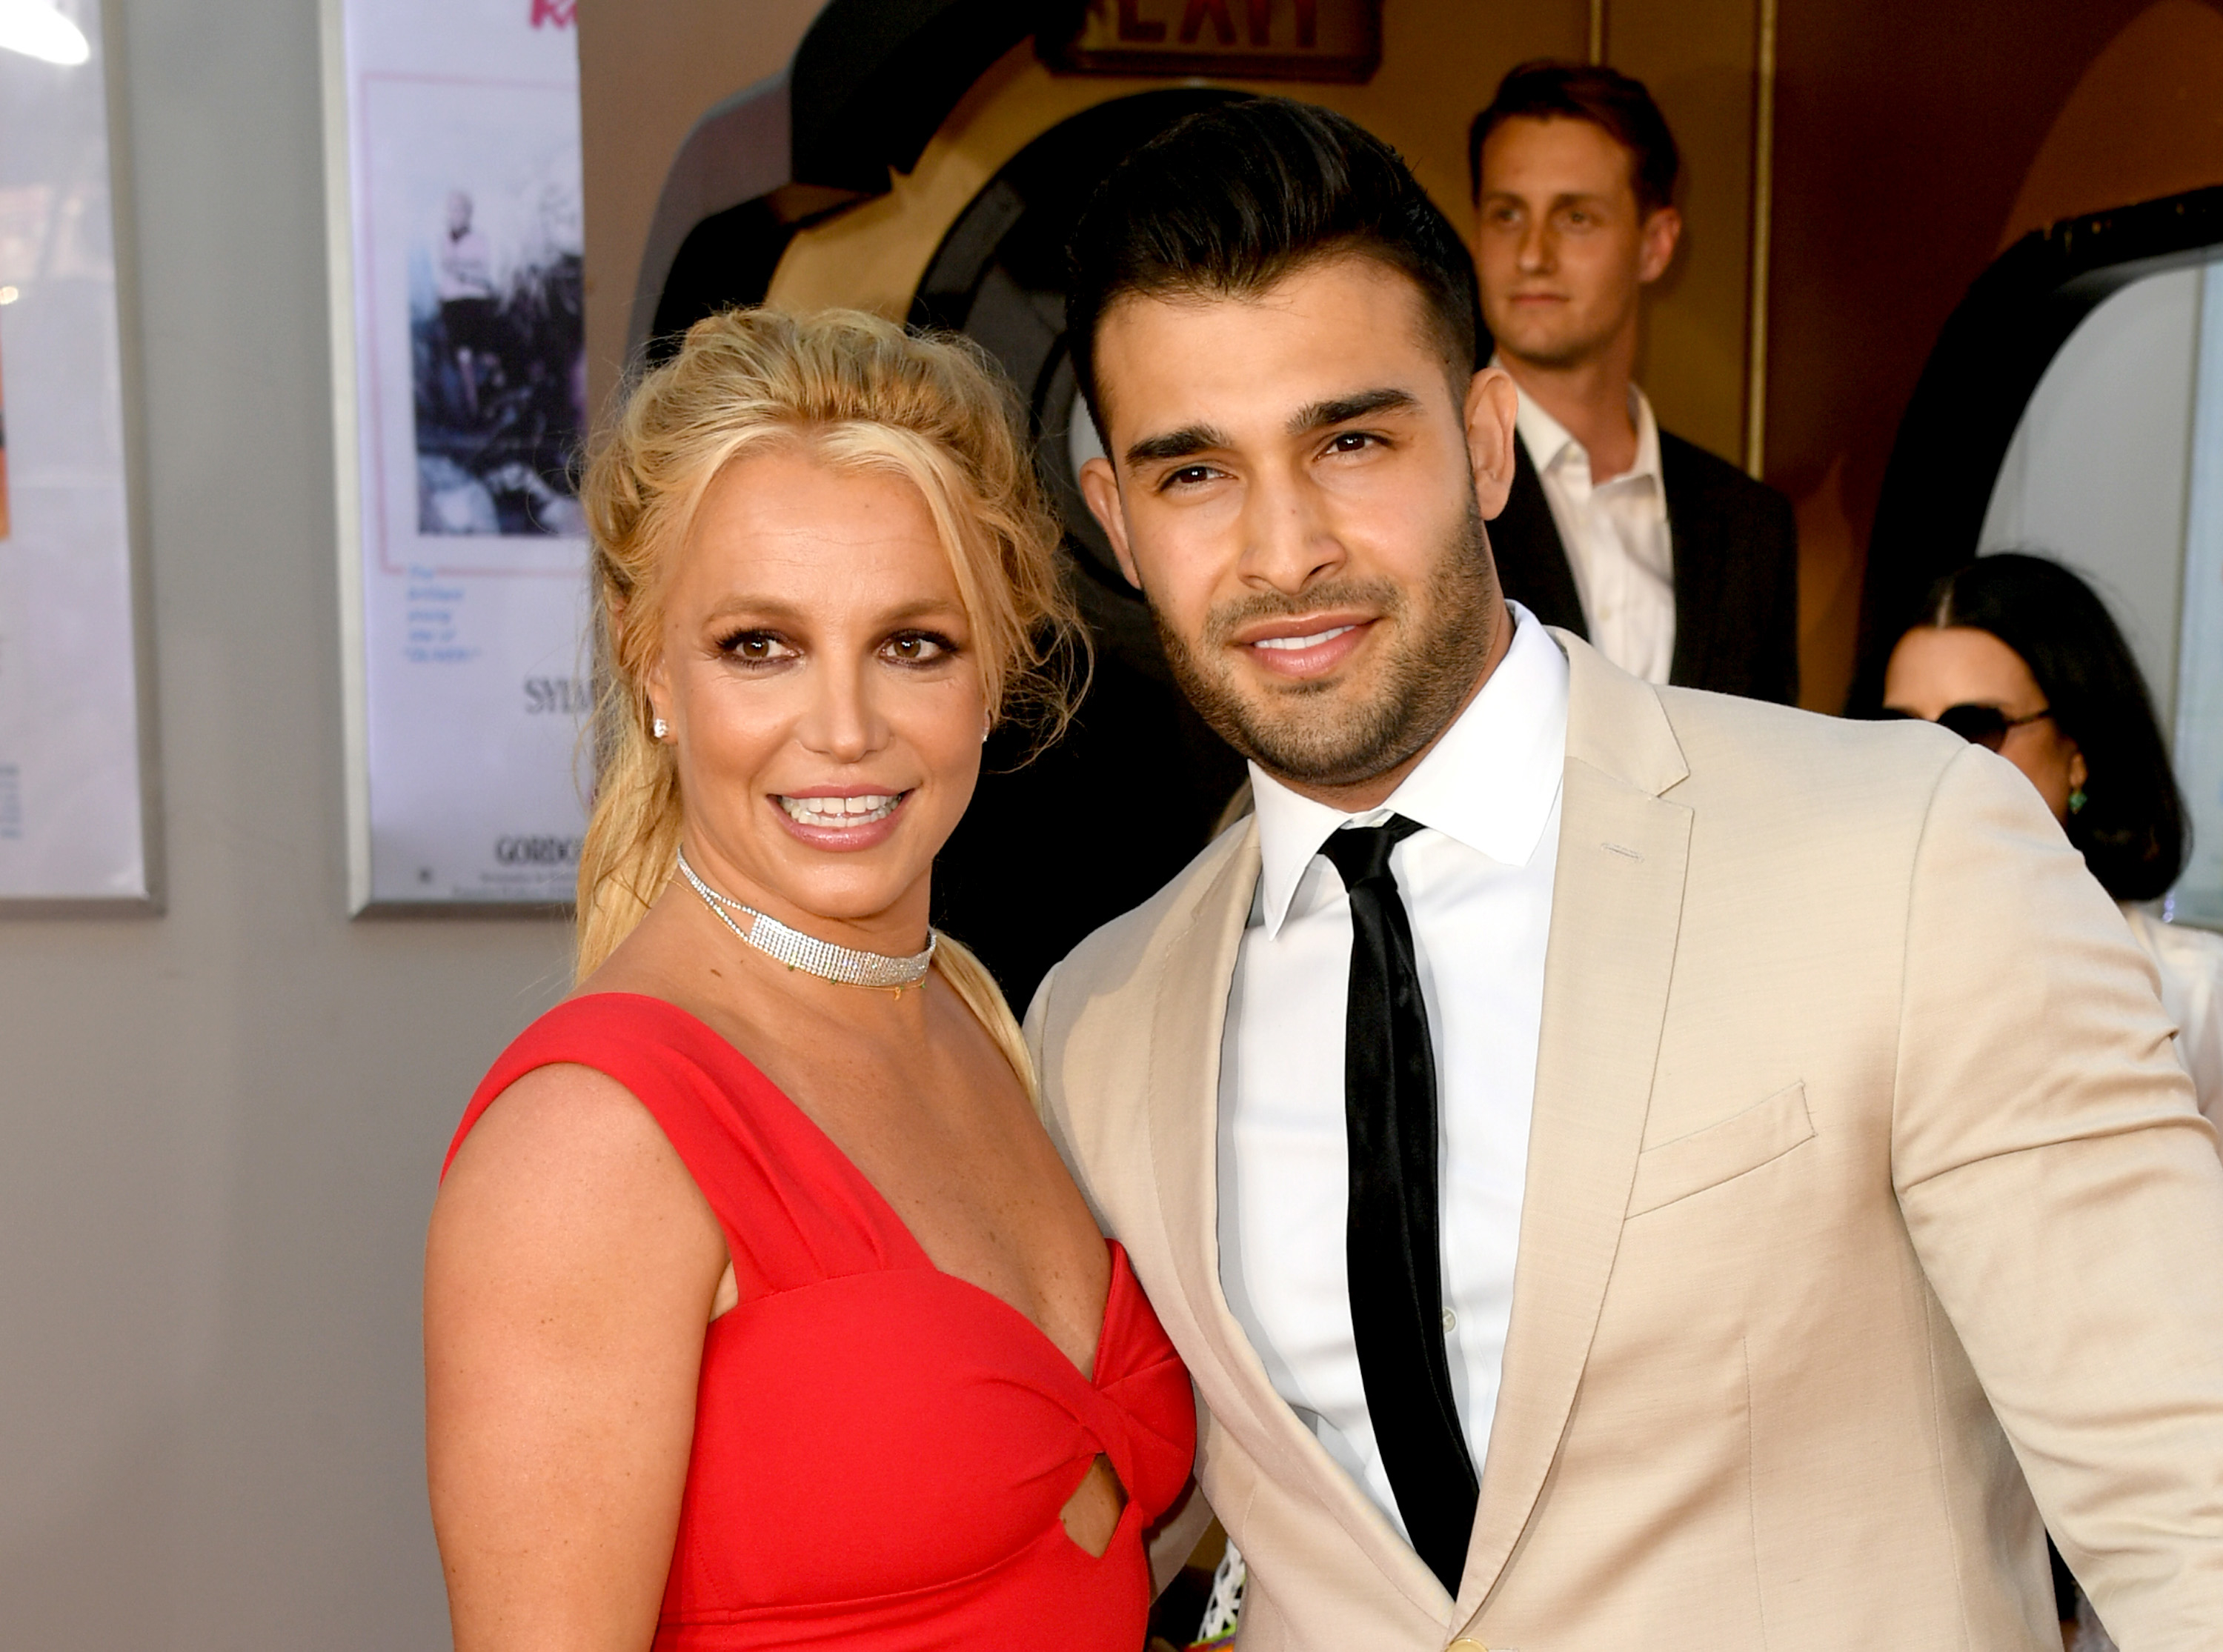 Close-up of Britney and Sam smiling at a media event